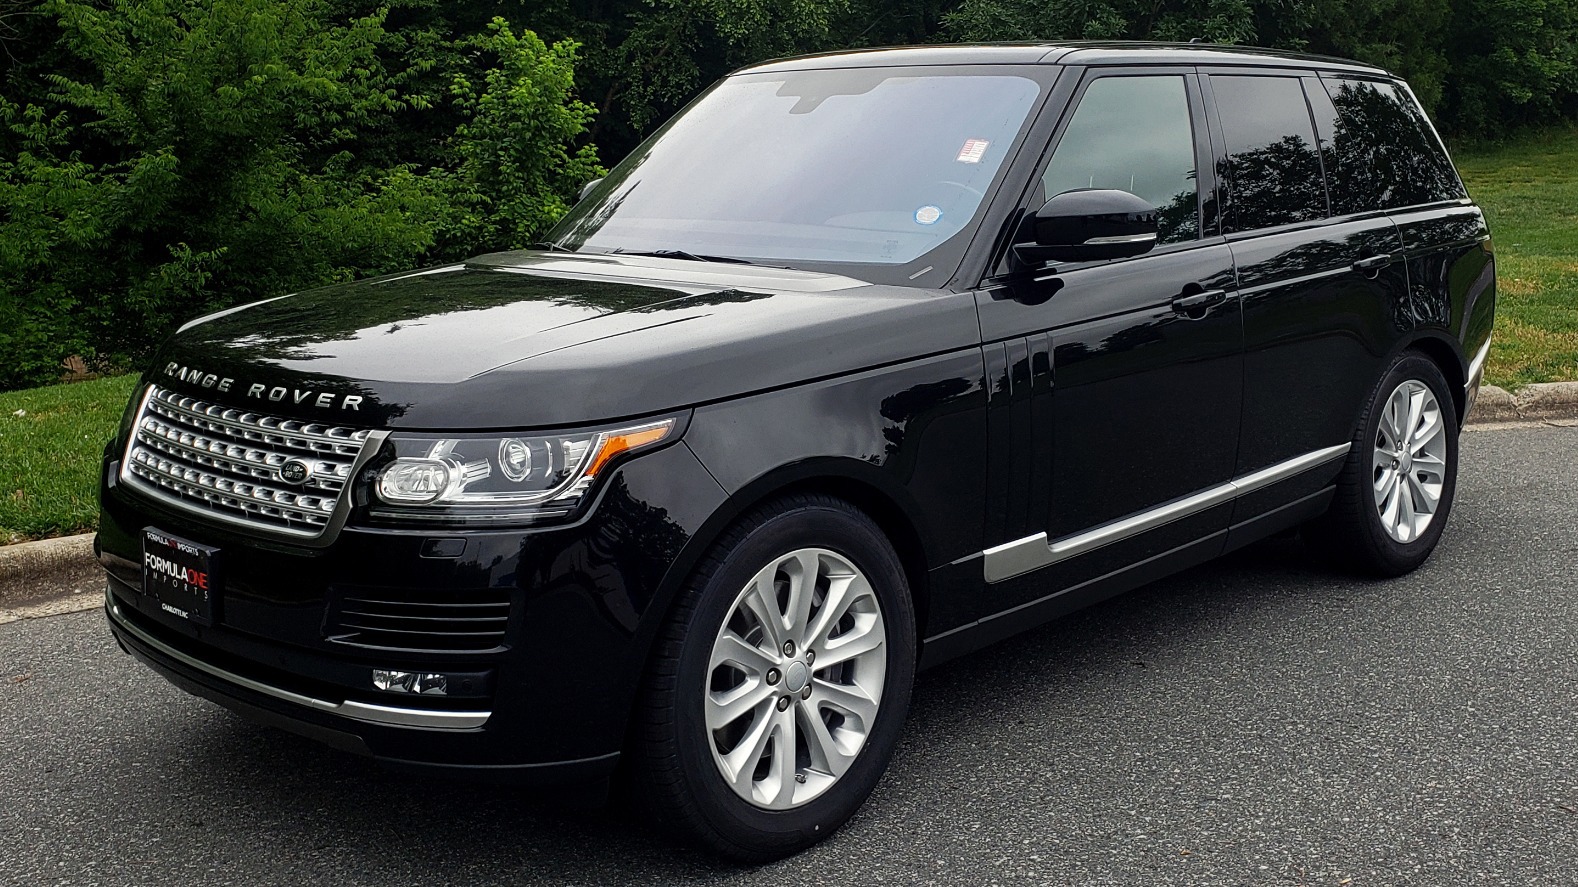 Used 2016 Land Rover RANGE ROVER HSE 3.0L / NAV / PANO-ROOF / VENT SEATS / REARVIEW / BLIND SPOT for sale $47,995 at Formula Imports in Charlotte NC 28227 1